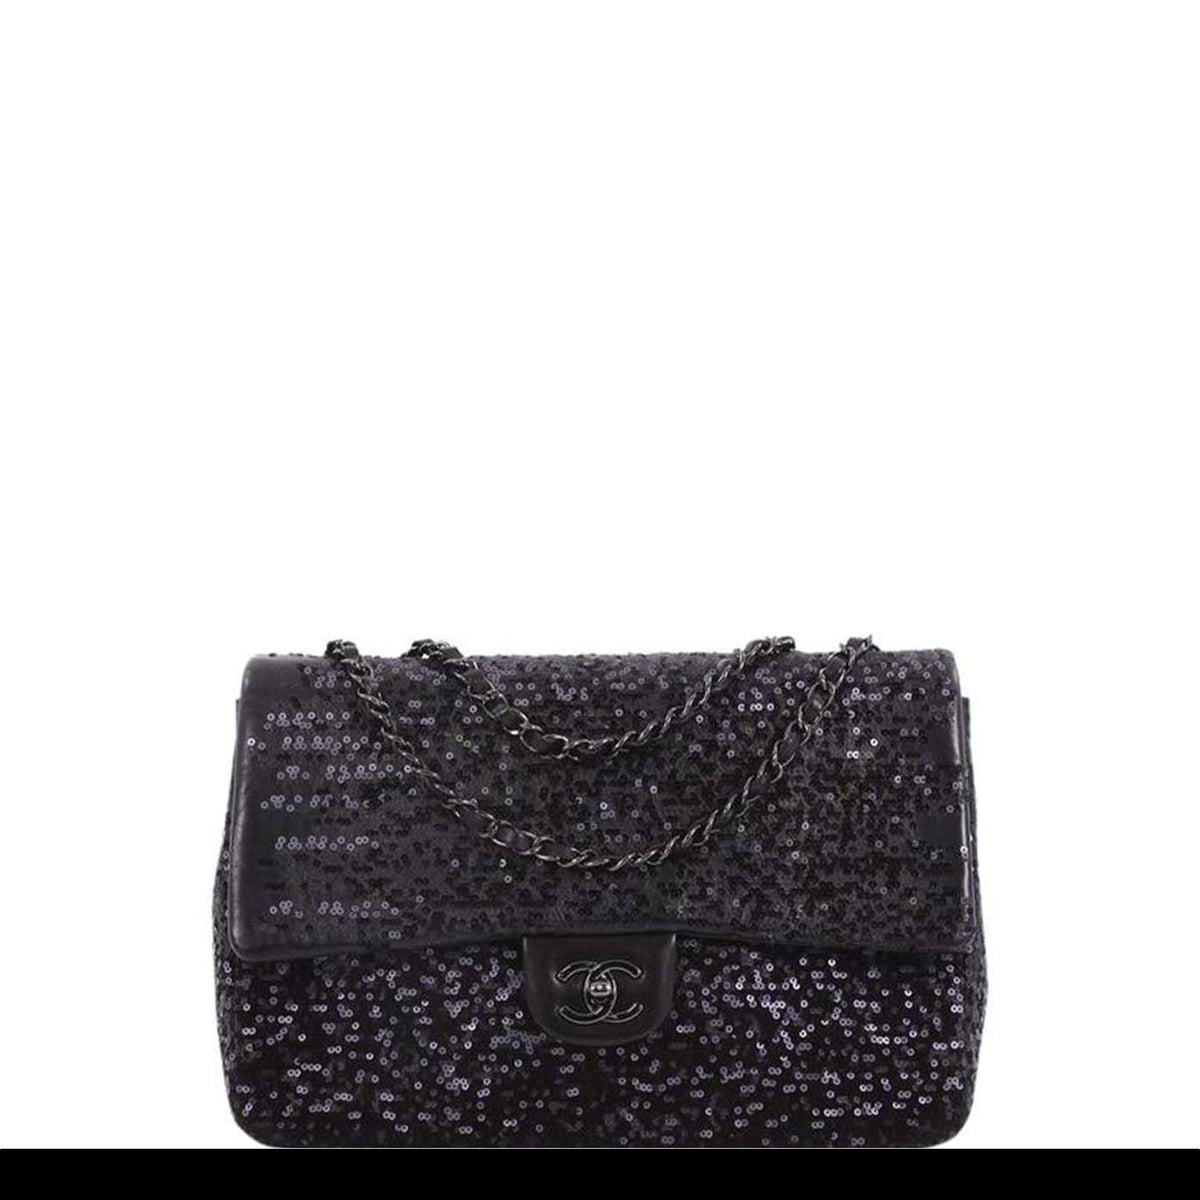 Chanel Classic Flap CC Obsession Rare Black with Dark Blue Pearls Lambskin Bag